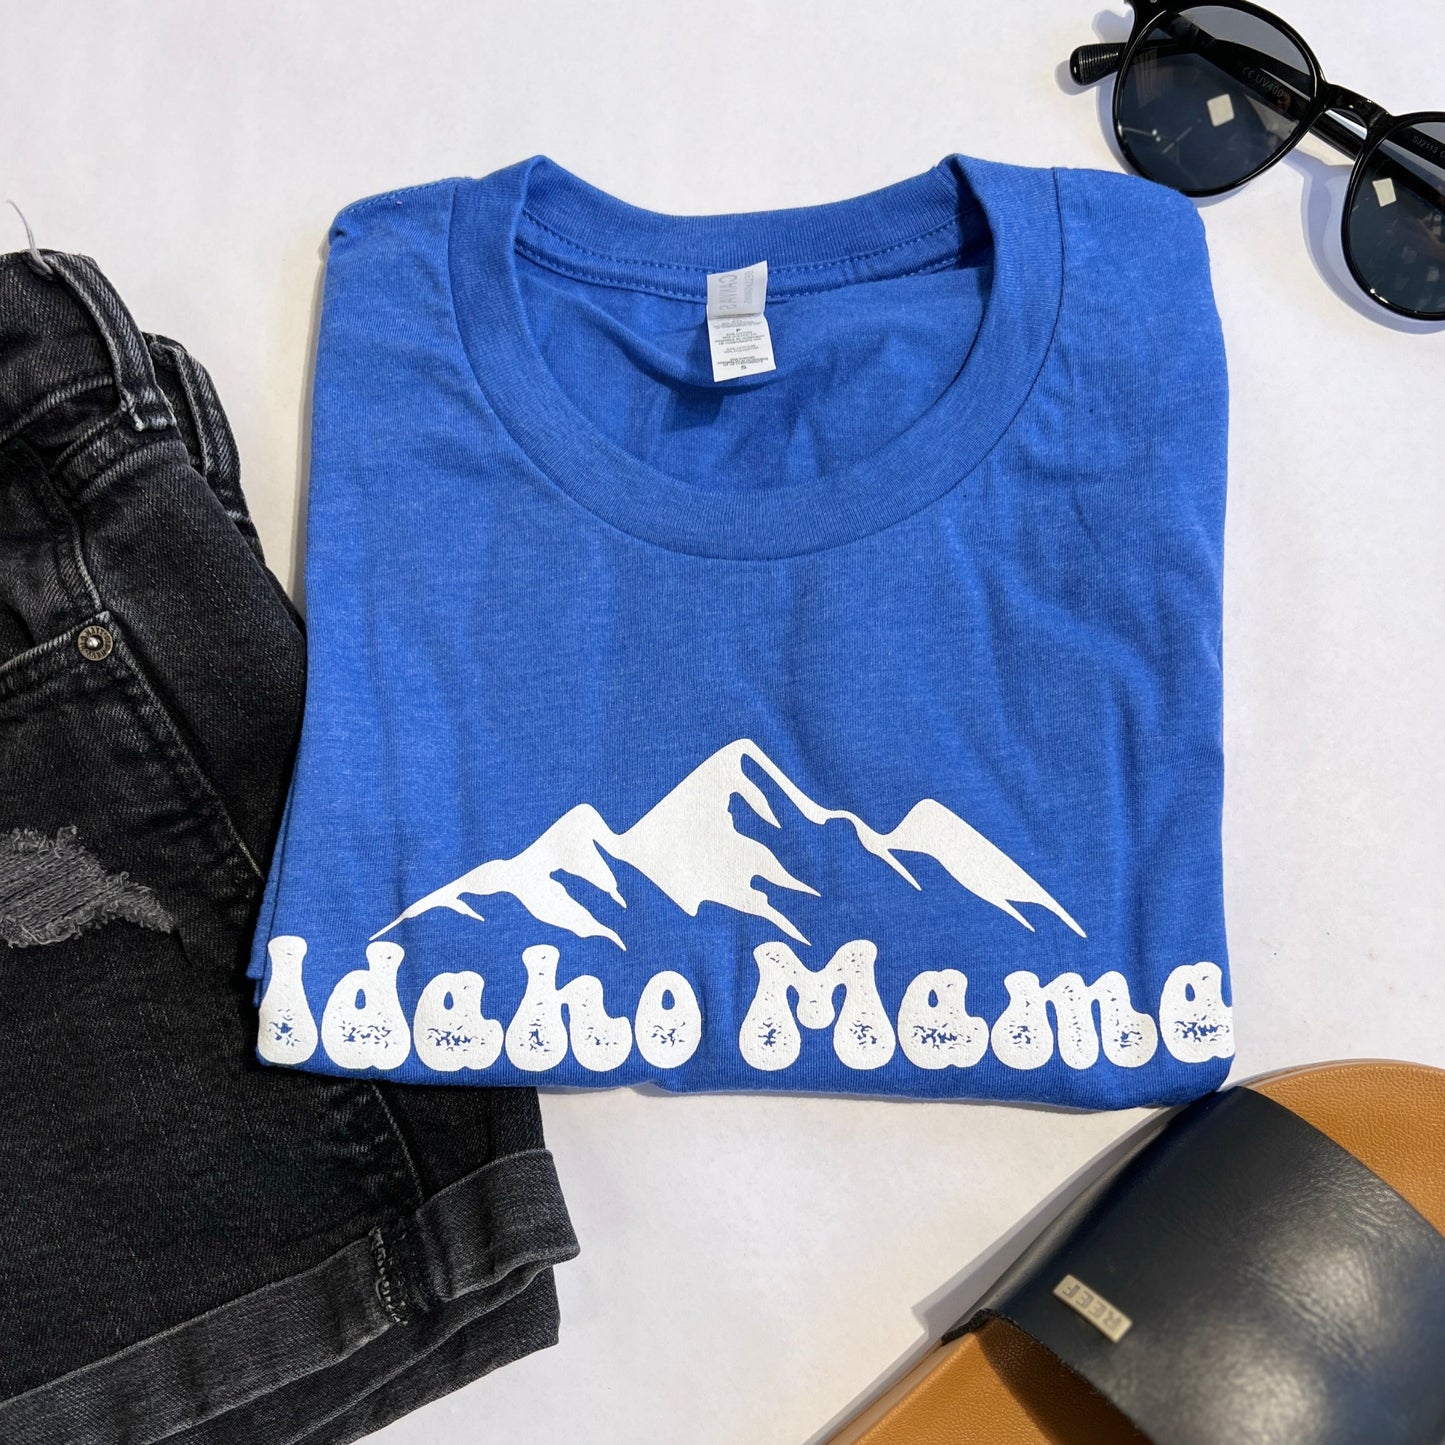 This blue Idaho Mama T Shirt is a perfect addition to any Idahoans closet. This Idaho T shirt has Idaho Mama on it, it comes in a comfortable and stretchy fabric. This blue is bright and goes well with black or white pants. This shirt is designed by TatorJo, an Idaho Apparel Clothing Company. This Idaho Shirt is screen printed in Idaho.